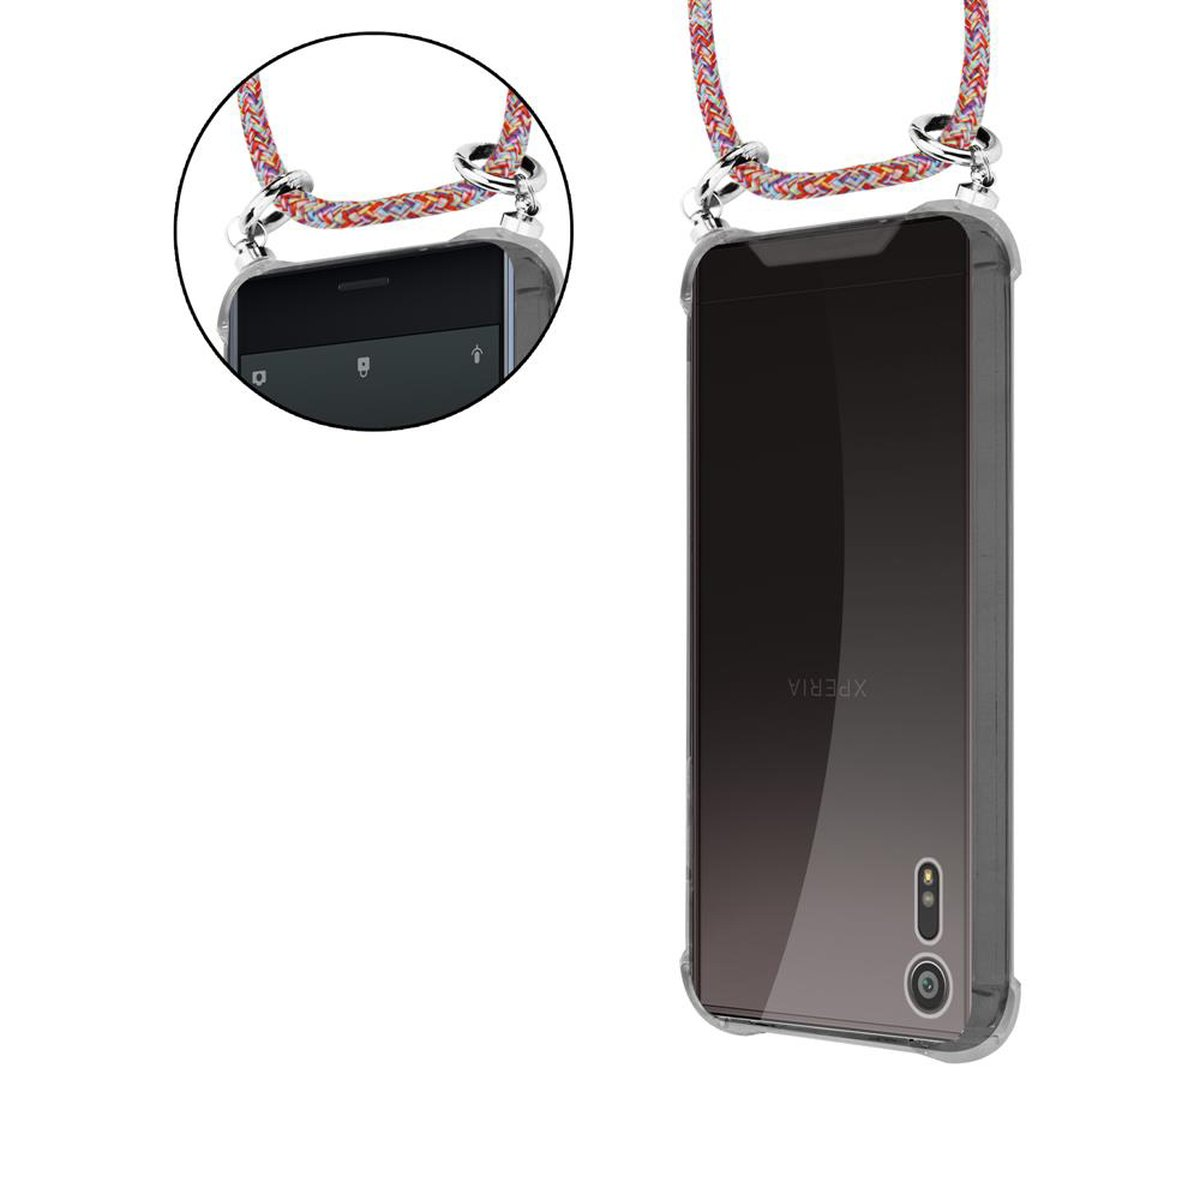 CADORABO Handy Sony, mit Kette XZs, XZ Xperia Silber abnehmbarer Ringen, COLORFUL Kordel und Band Backcover, / Hülle, PARROT